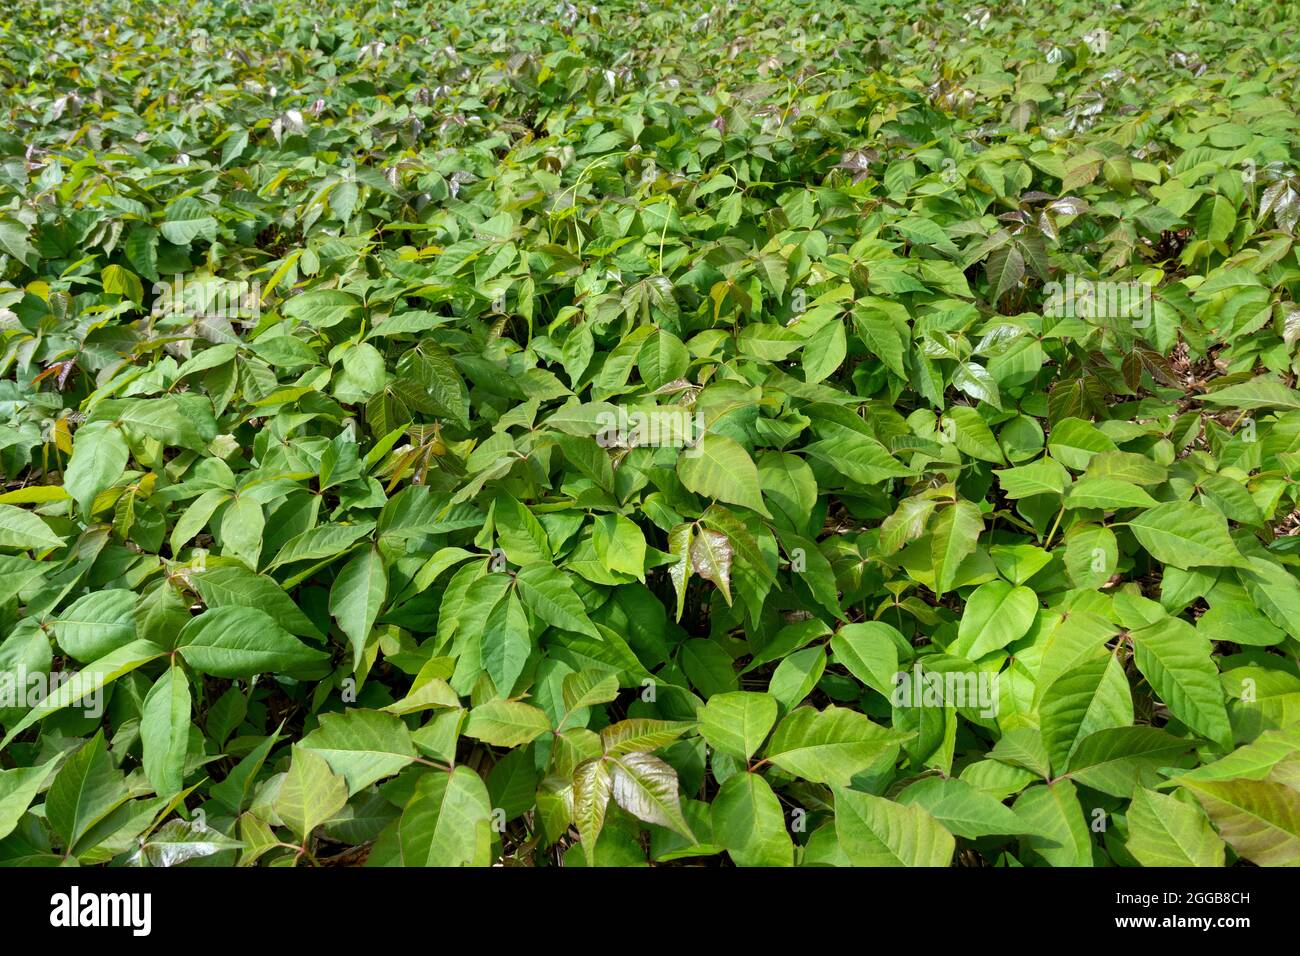 Field with Toxicodendron radicans, commonly known as eastern poison ivy, grown for and used as homeopathic medicine Stock Photo